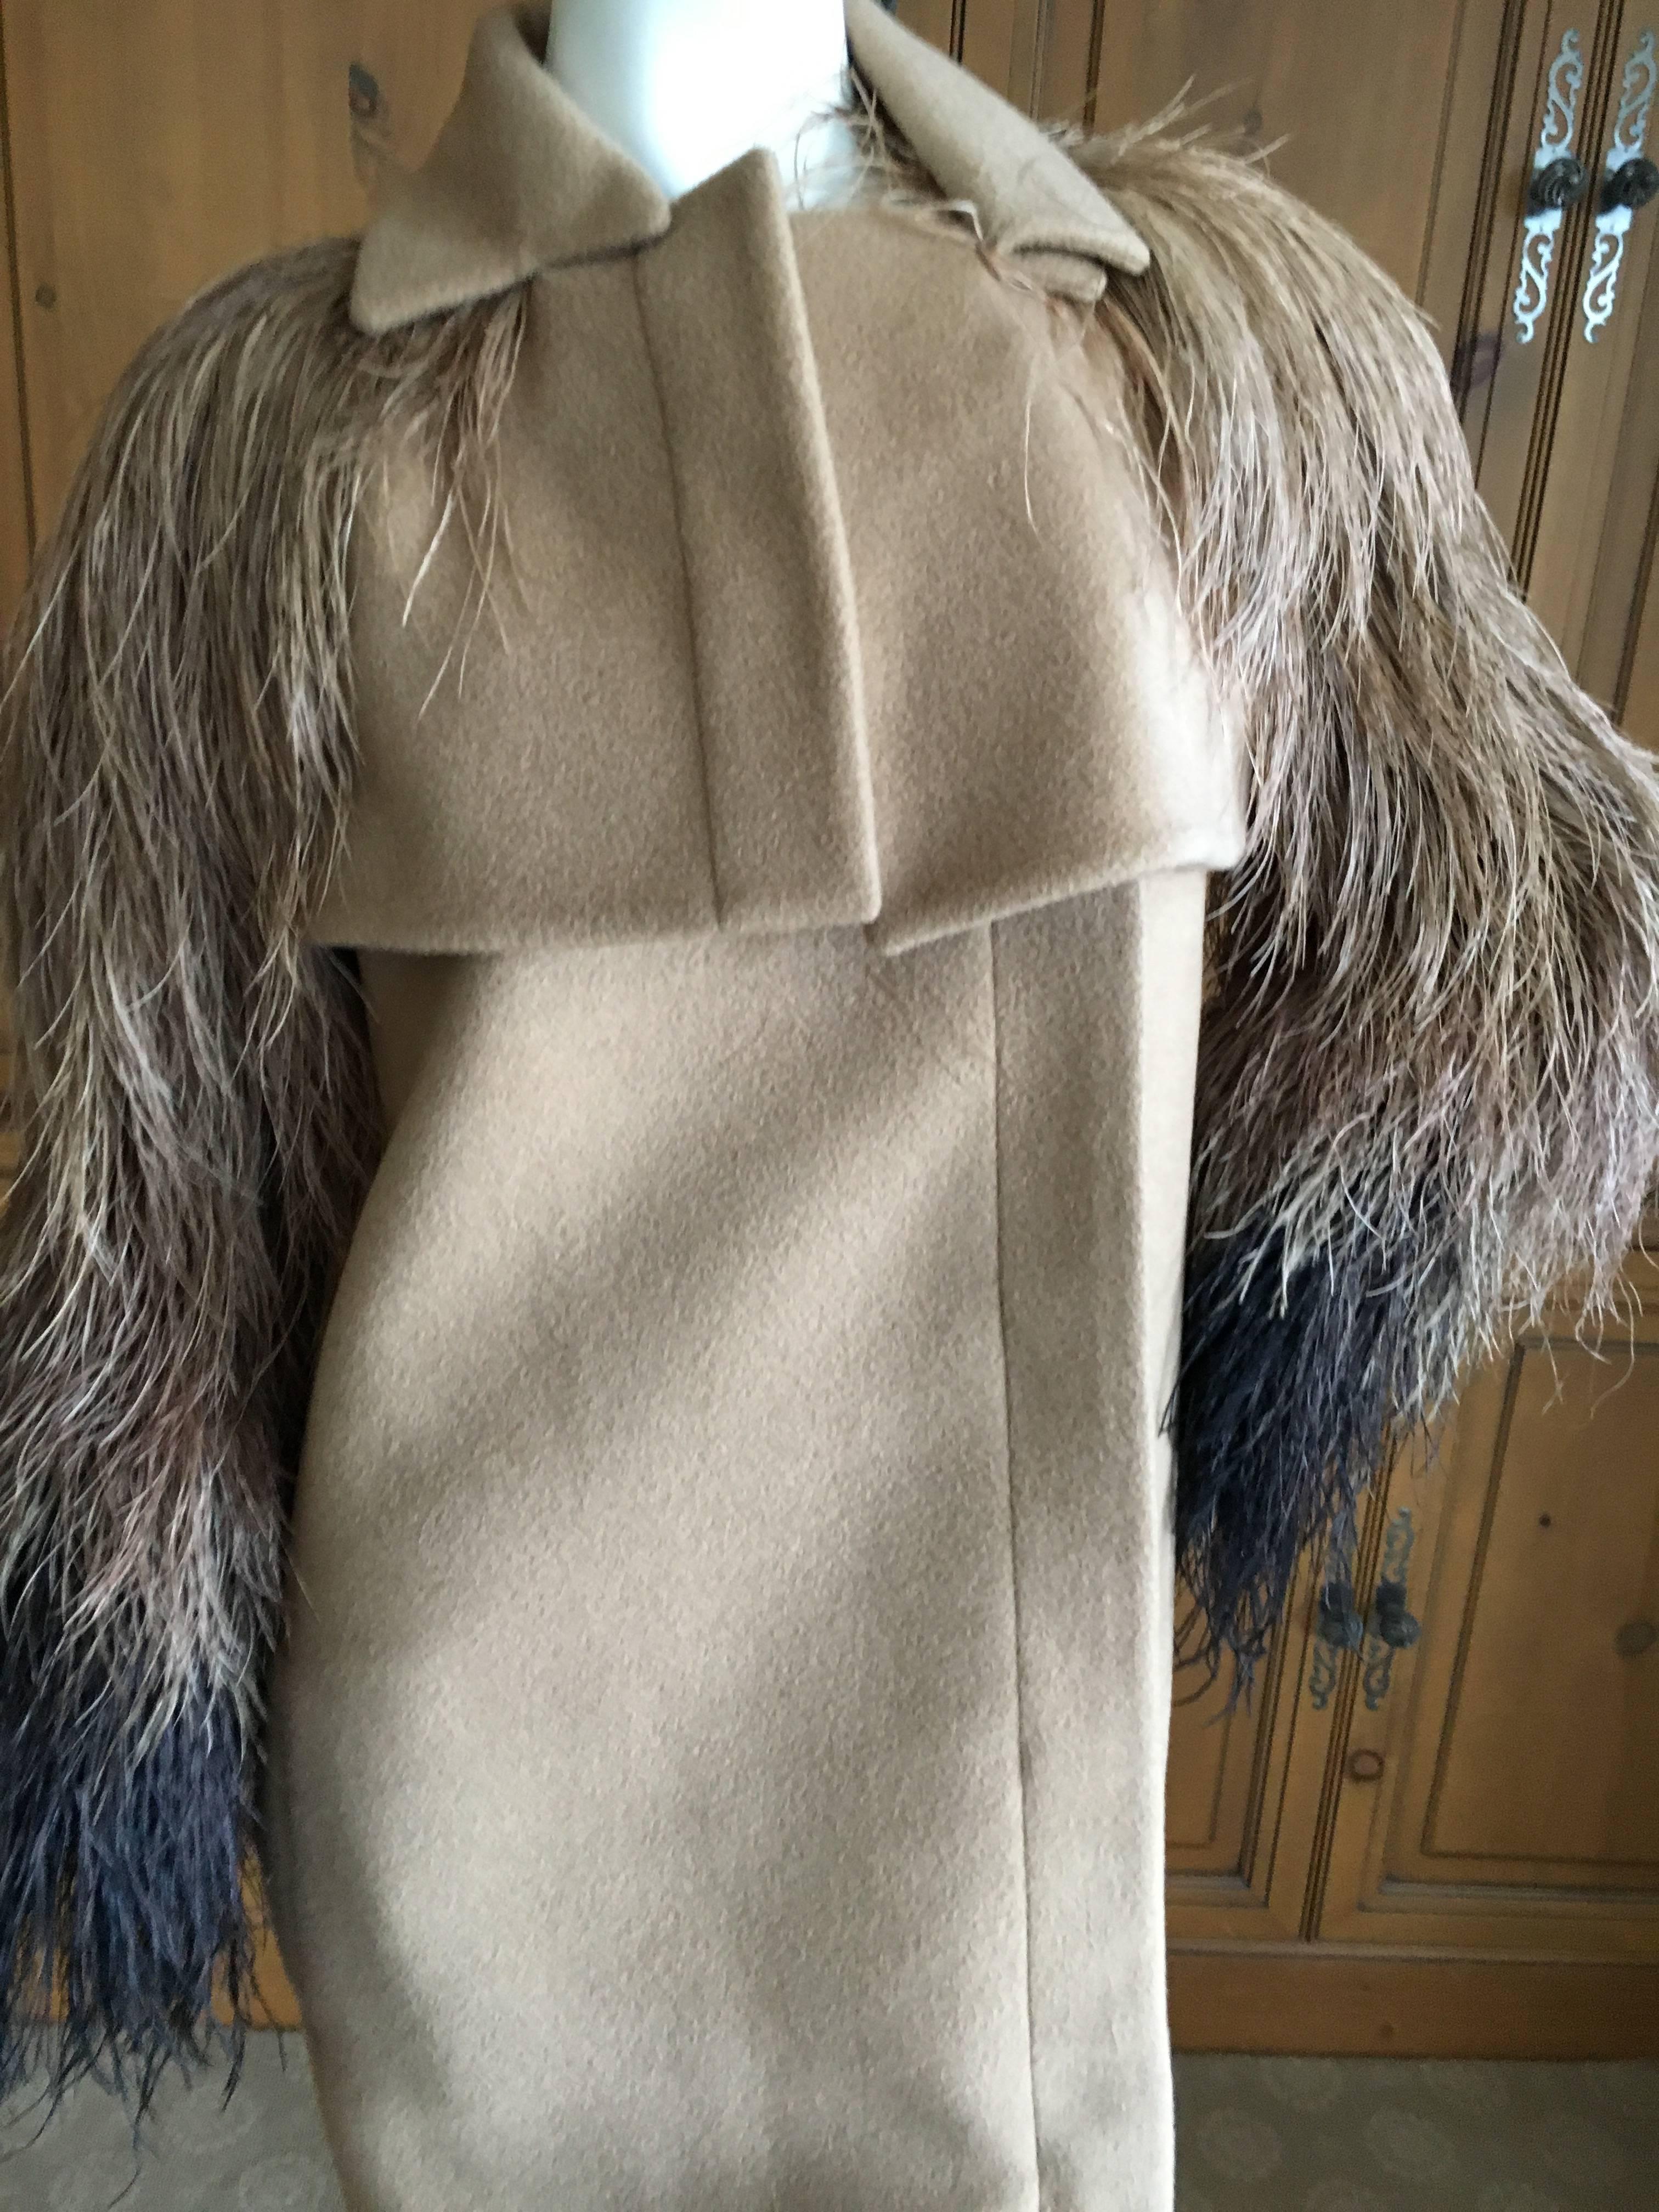 Gucci Luxurious Cashmere Coat with Ombre Feather Sleeves Size 38 In Excellent Condition For Sale In Cloverdale, CA